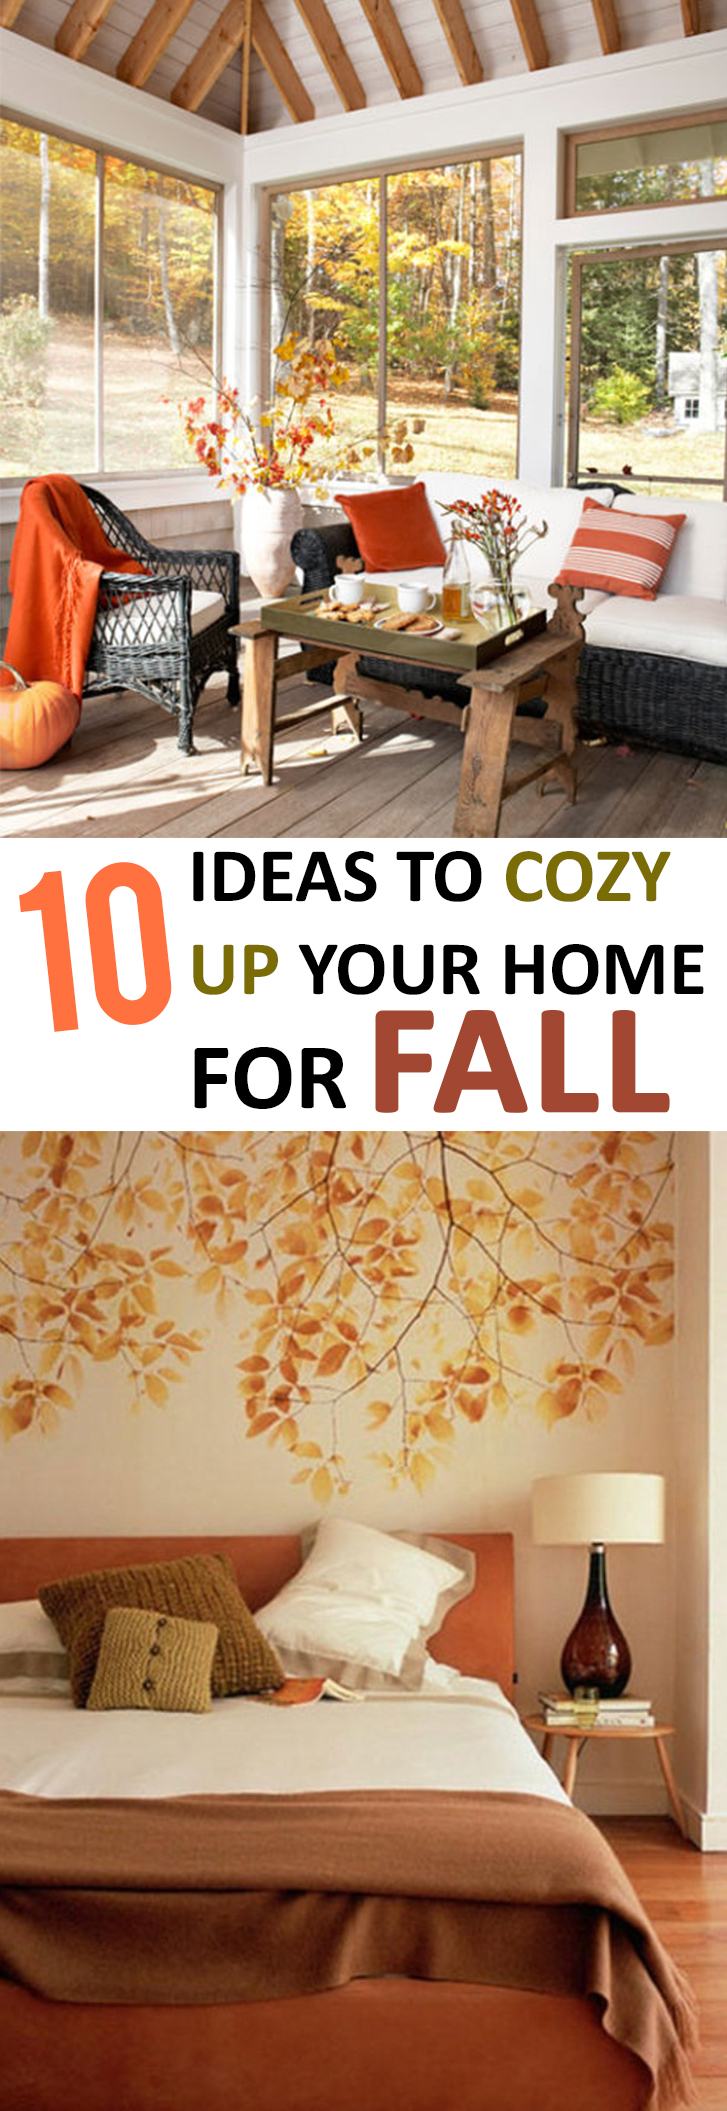 10 Ideas to Cozy Up Your Home for Fall